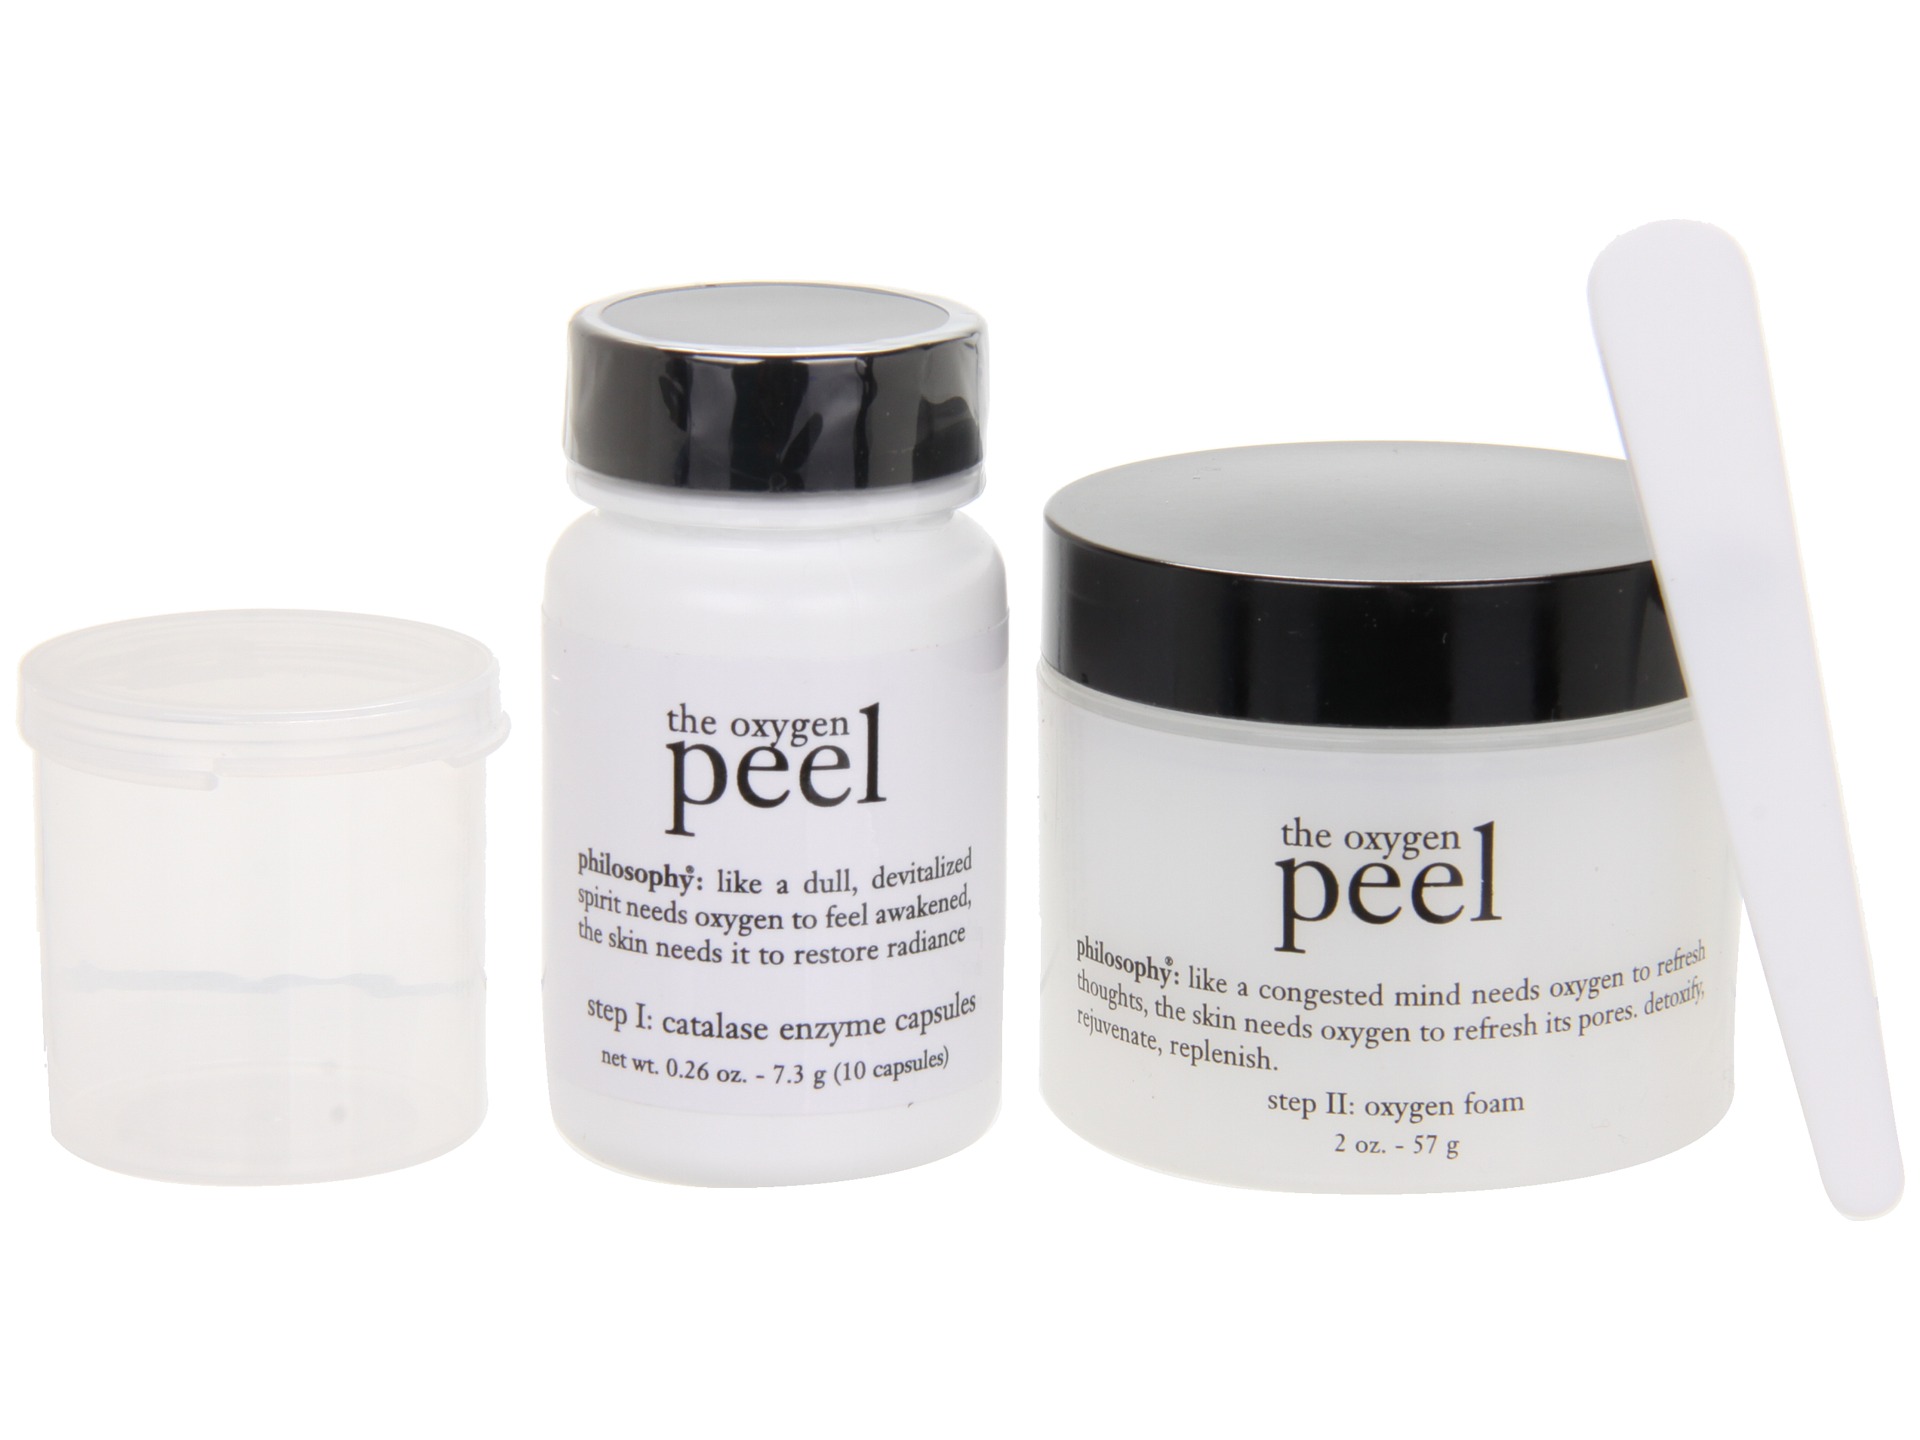 No results for philosophy oxygen peel kit - Search Zappos